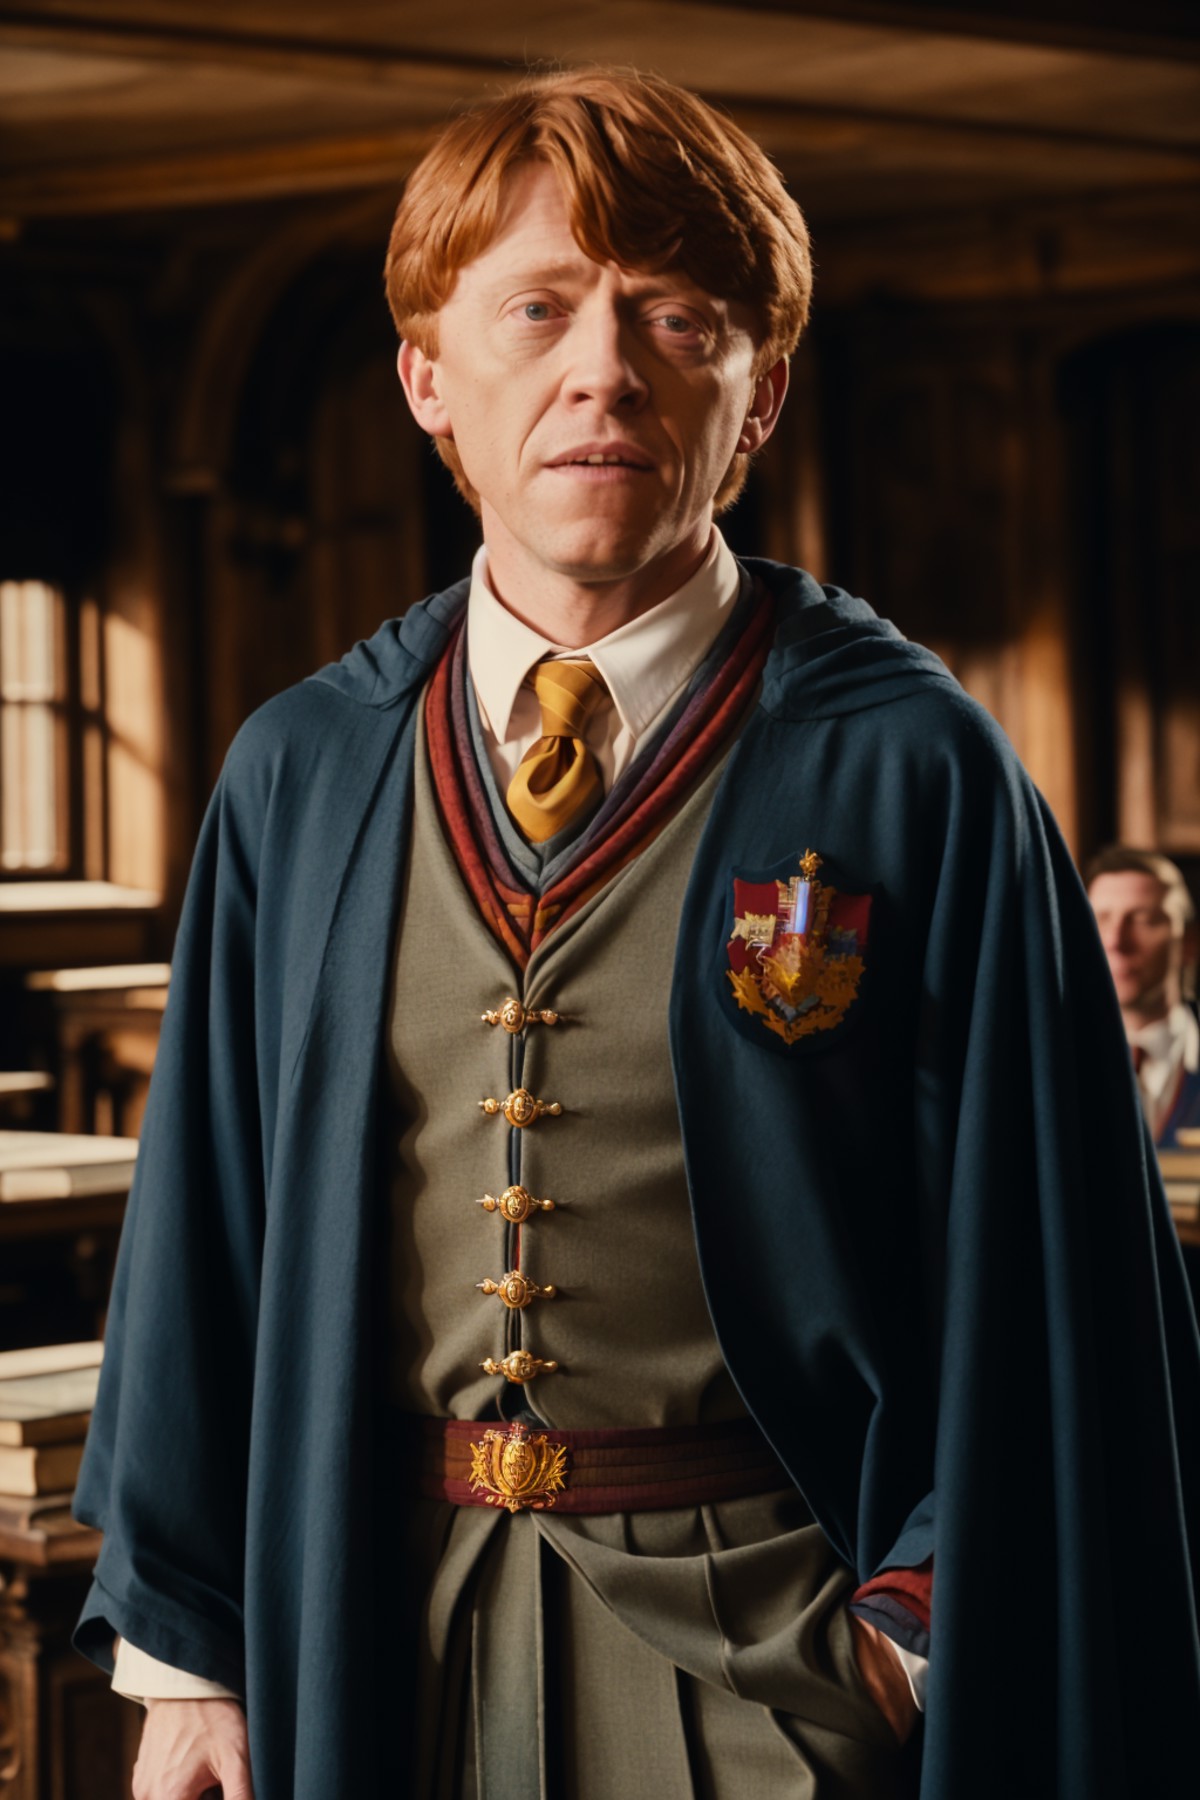 AS-MidAged ron weasley, as a professor in hogwarts standing in a hogwarts castle interior classroom wearing robes
(masterp...